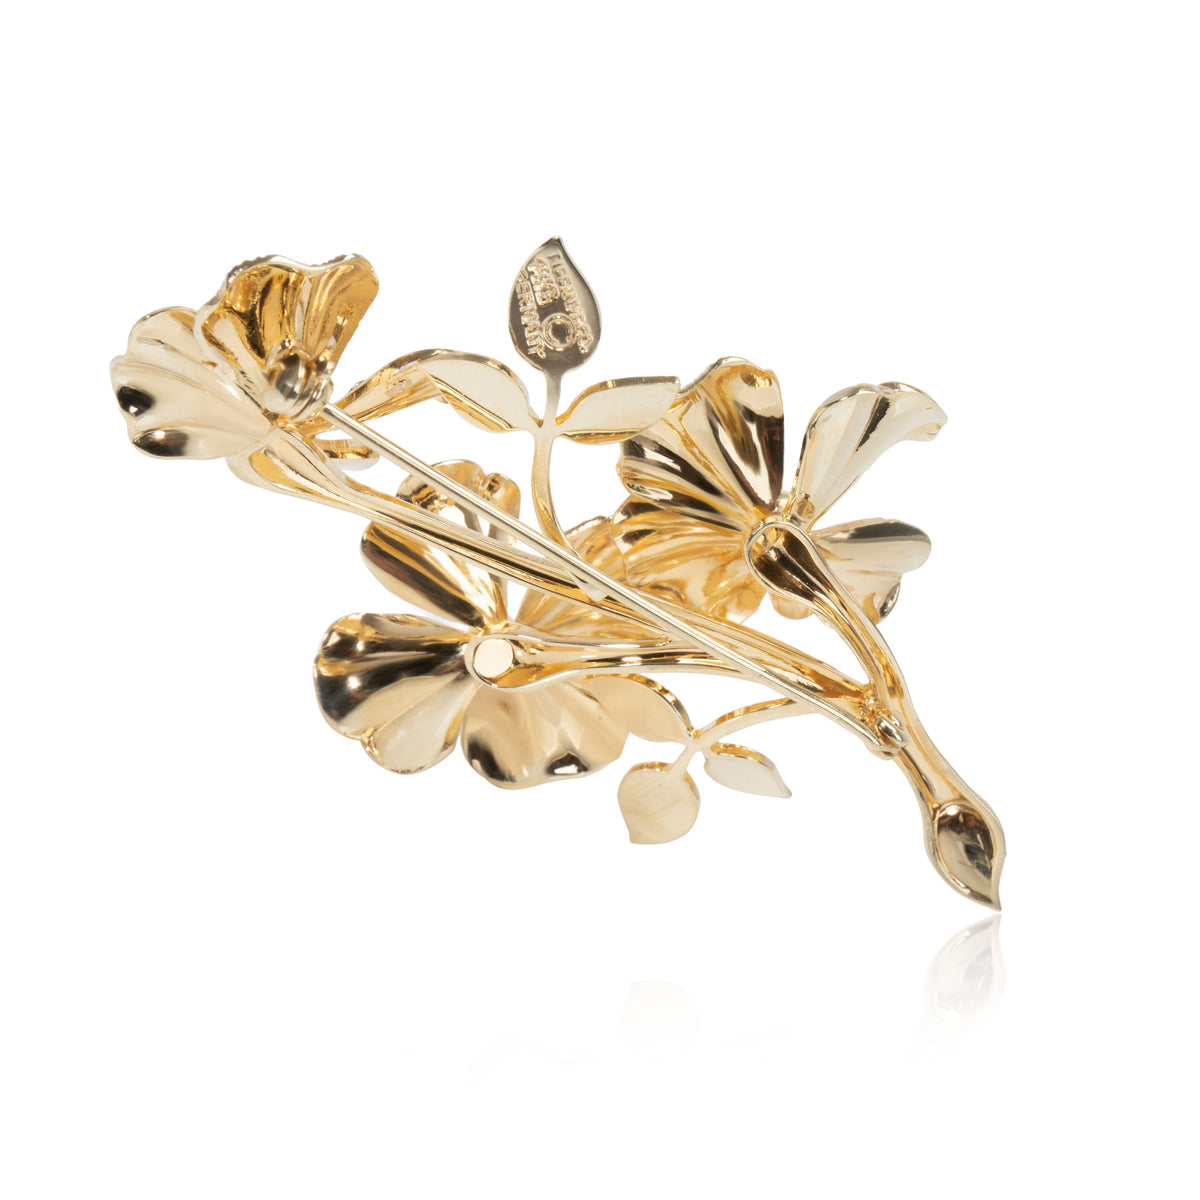 Tiffany & Co. Vintage Floral Brooch in 14K Yellow Gold